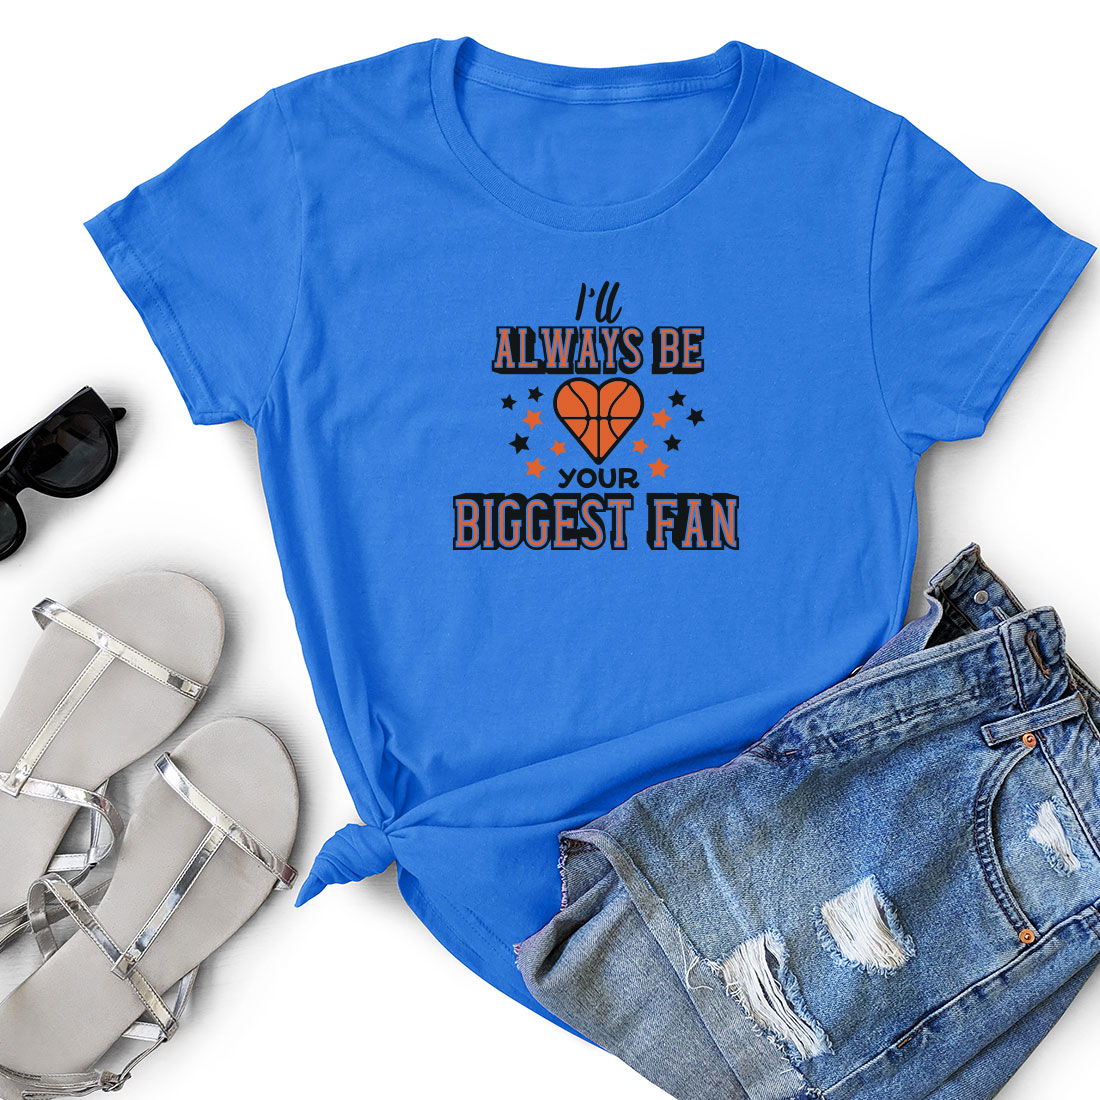 T - shirt that says i'll always be your biggest fan.